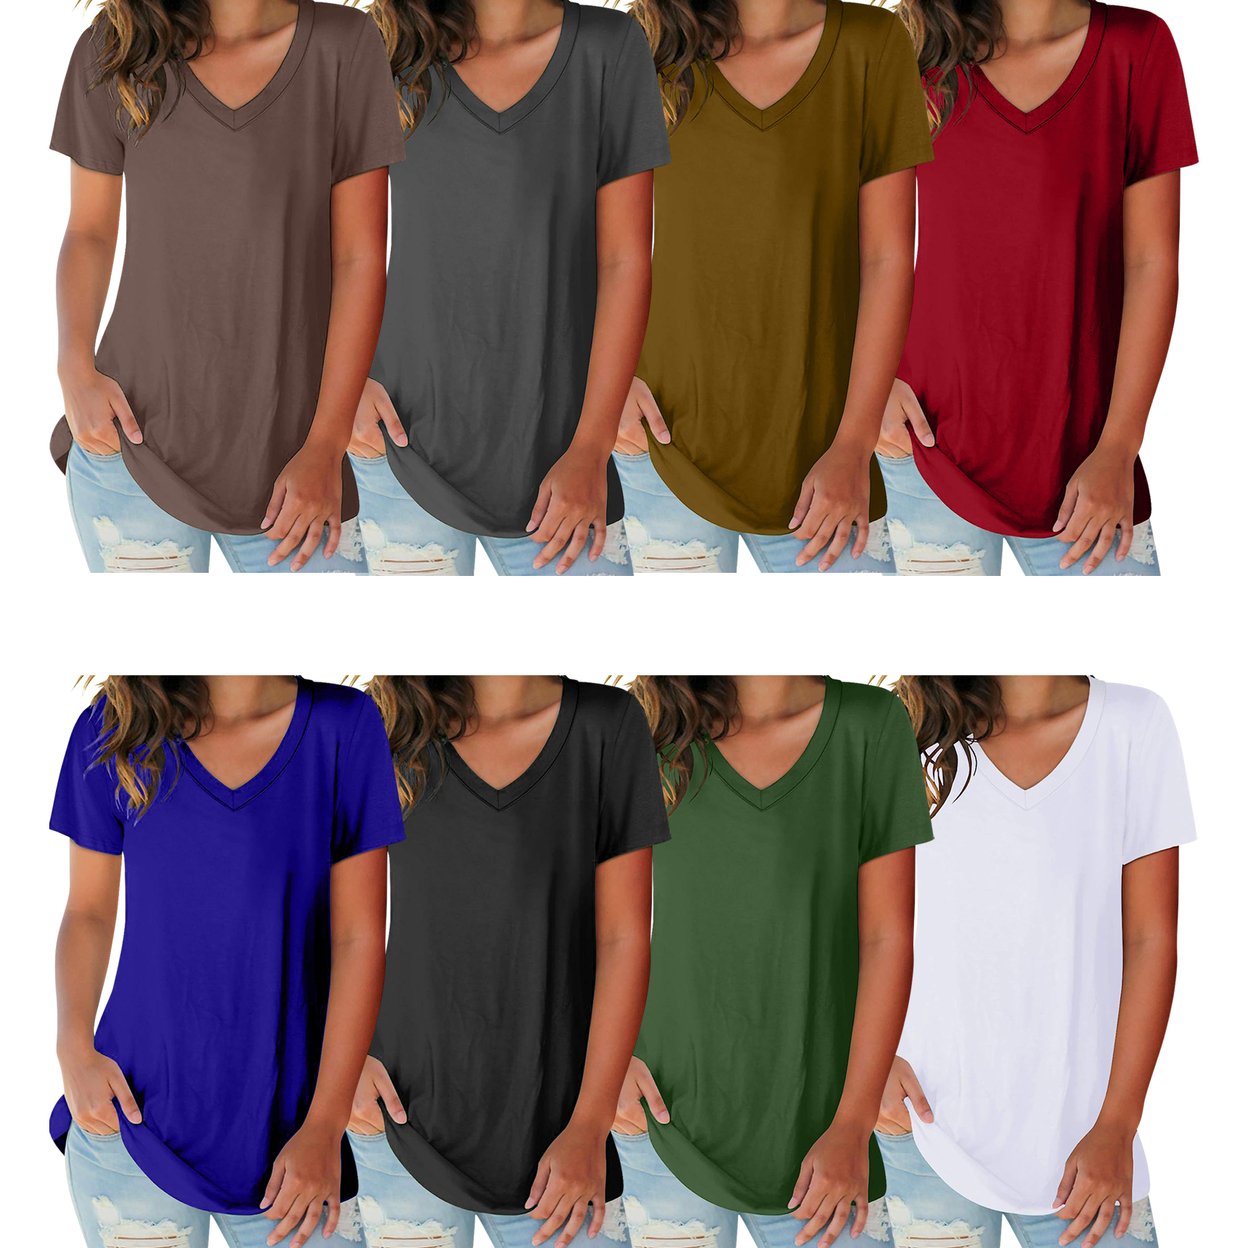 3-Pack: Women's Ultra Soft Smooth Cotton Blend Basic V-Neck Short Sleeve Shirts - Black, White, Brown, Small